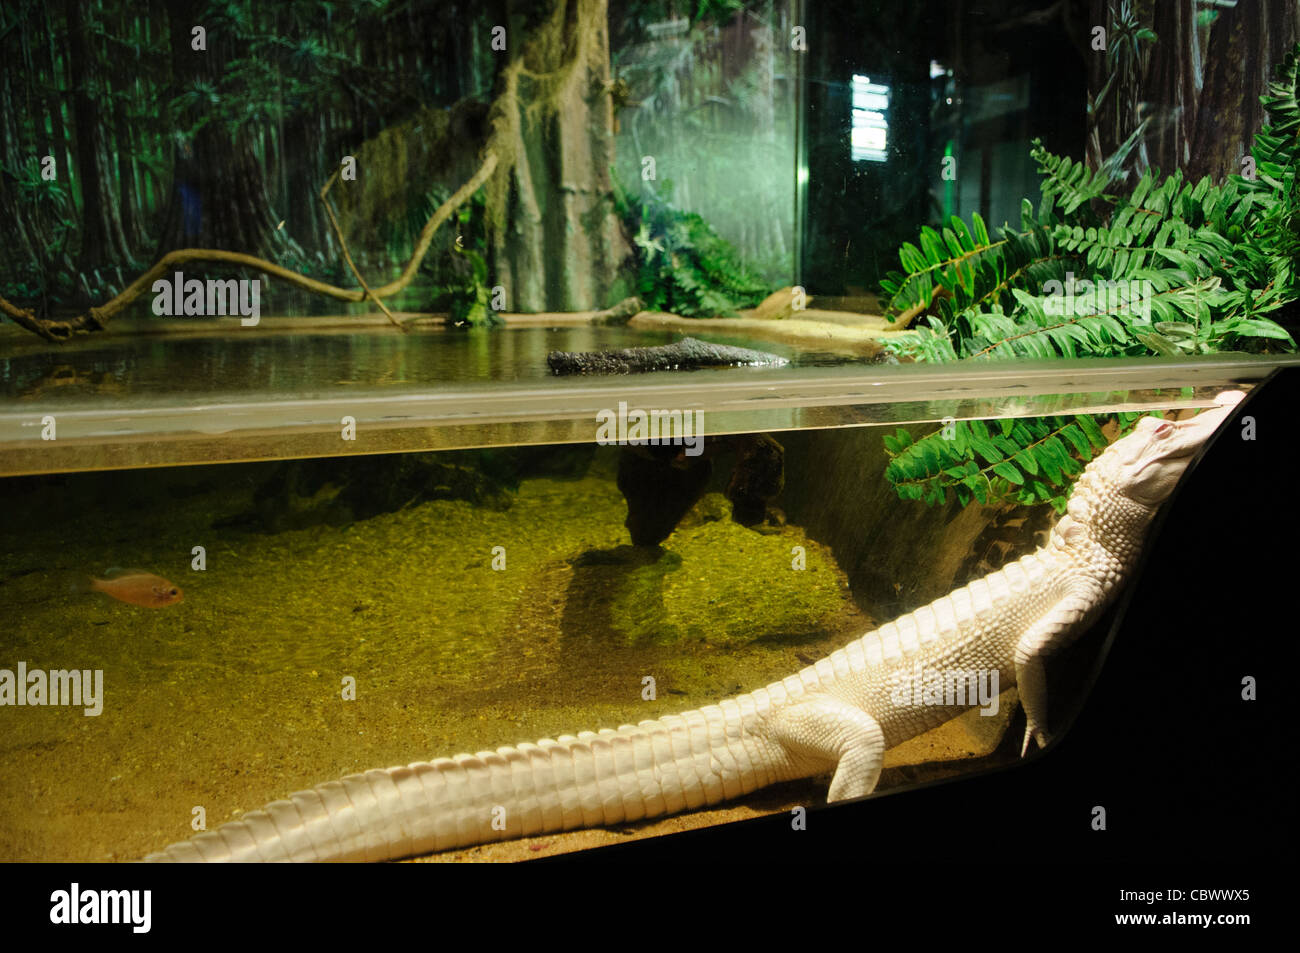 WASHINGTON DC, USA - A rare albino alligator named Oleander on display at the National Aquarium in downtown Washington DC in late-2011 as part of the Secrets of the Swamp special exhibit. The National Aquarium is in the basement of the Department of Commerce Building, where it has been housed since 1932. Much smaller and less well known than its affiliated facility in Baltimore, Washington's National Aquarium consists of a series of tanks illustrated various types of marine environments, with special emphasis on the many marine sanctuaries in U.S. marine territory. NB: The aquarium closed in 2 Stock Photo